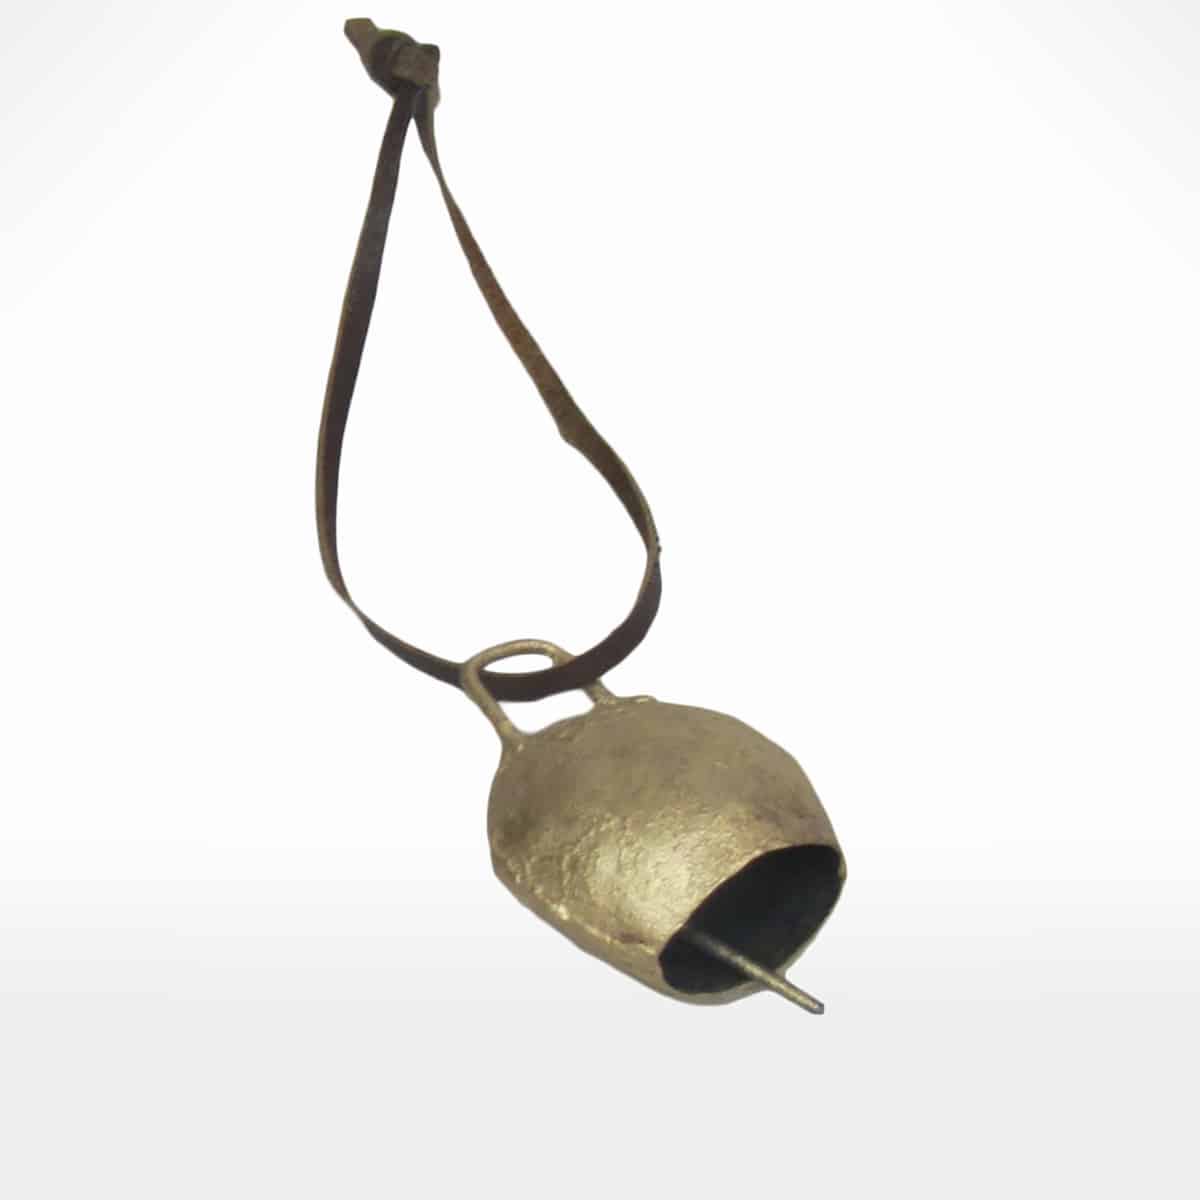 Decorative Bell | Quality hand-made products by Noah's Ark ...